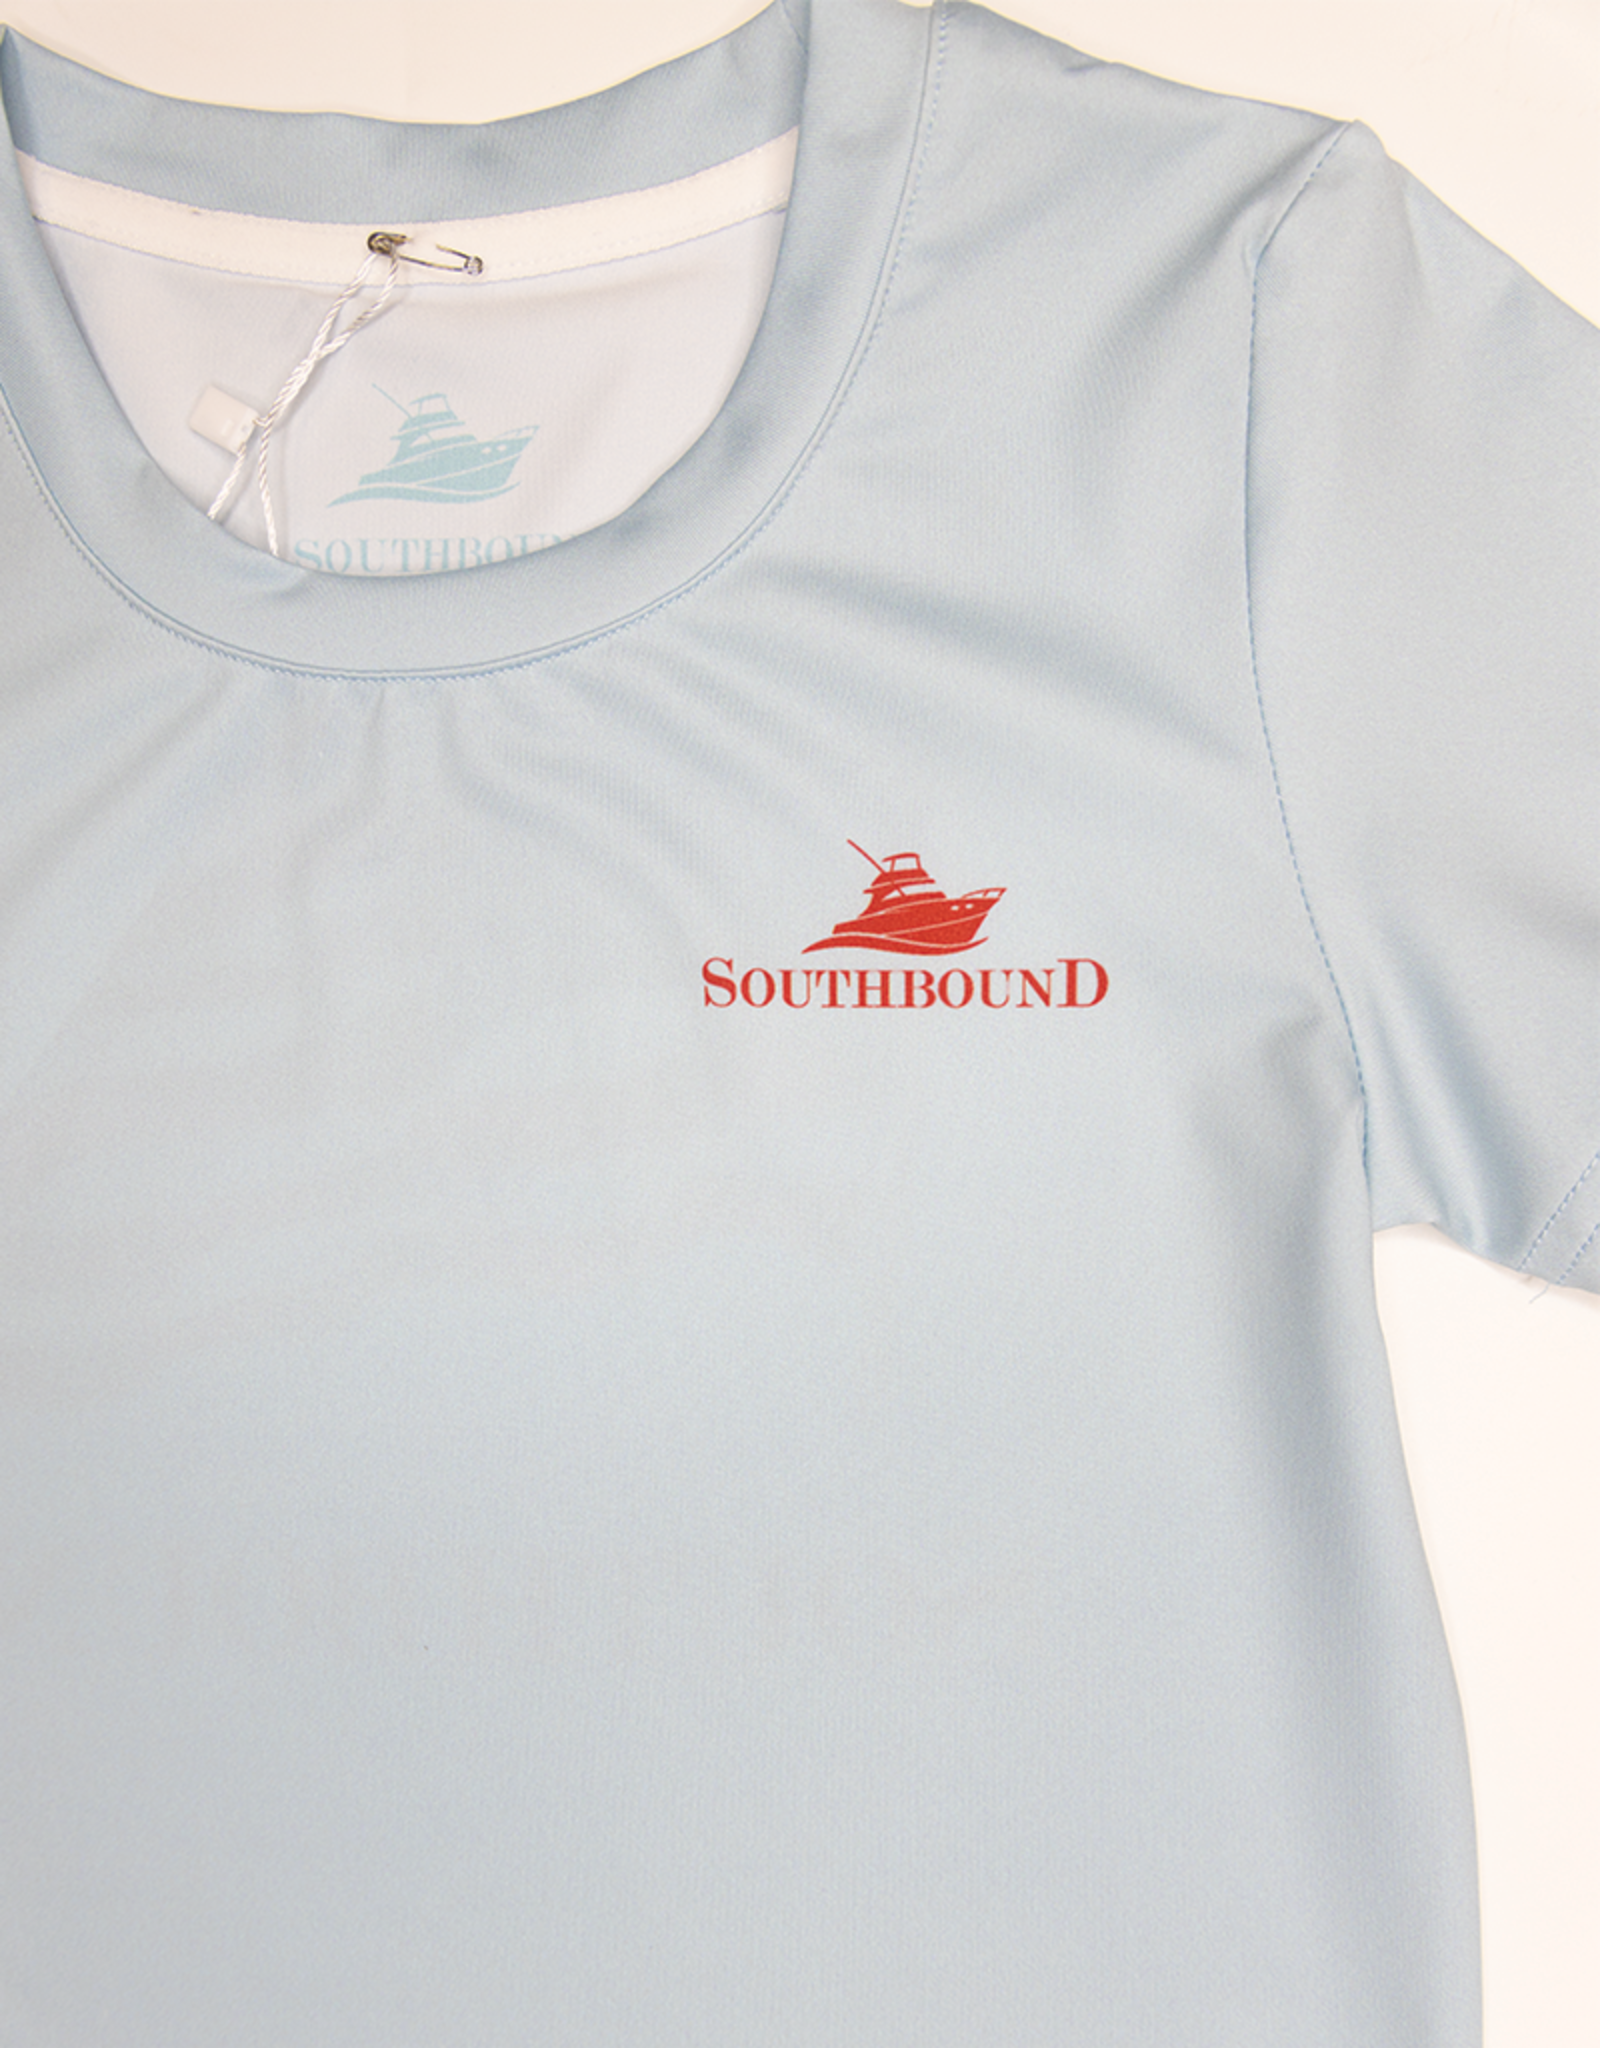 South Bound 3387 Performance Tee Blue Flag